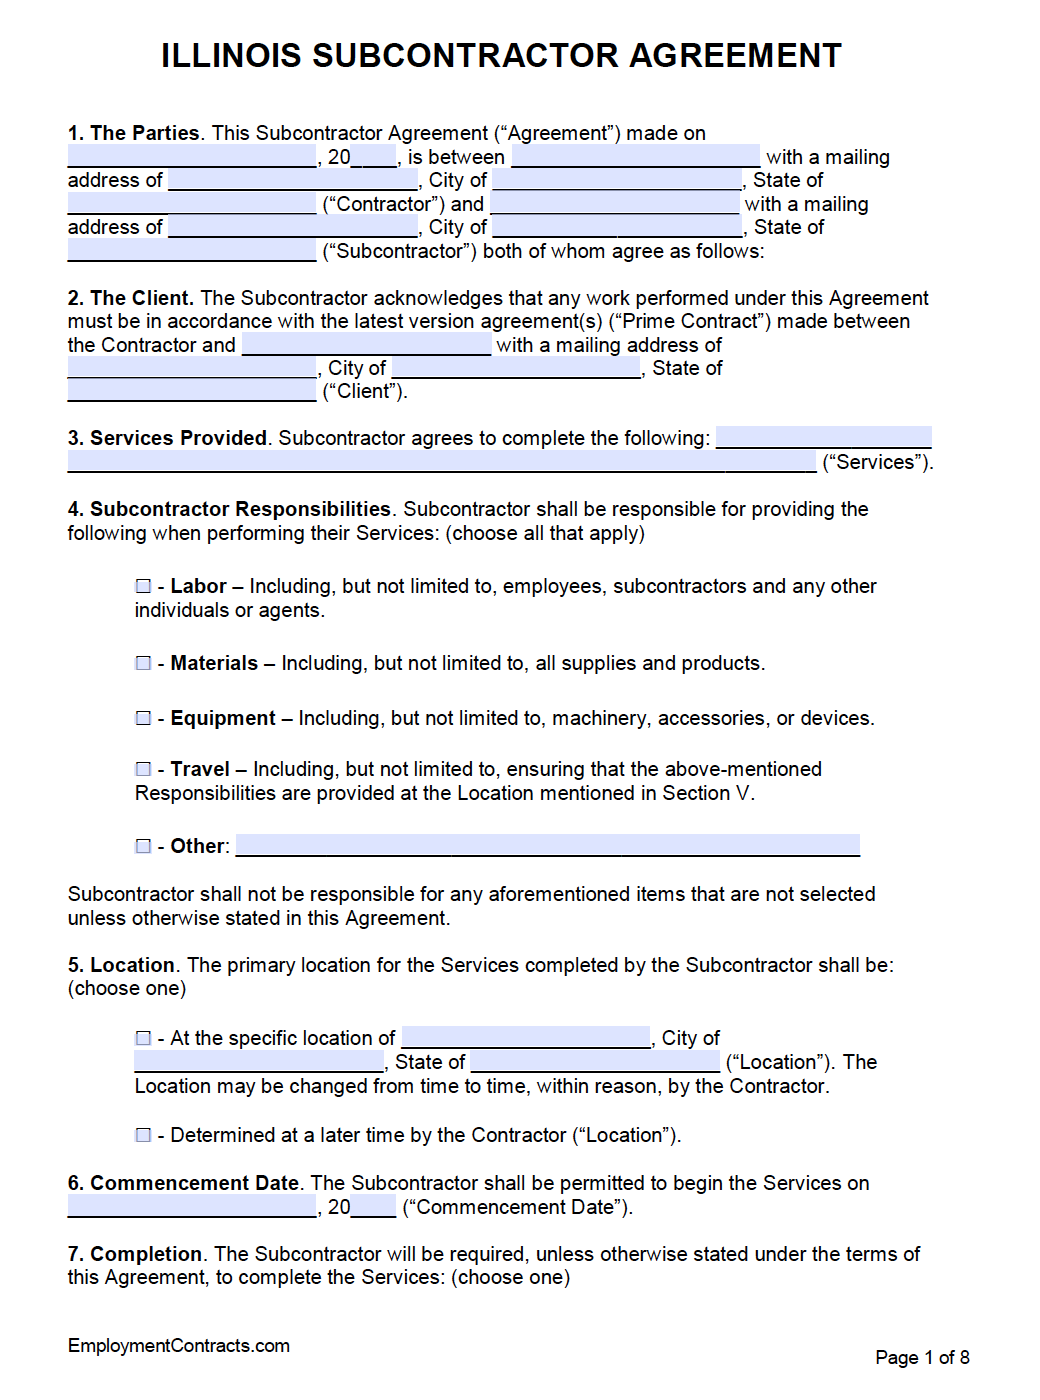 illinois-subcontractor-agreement-template-pdf-word